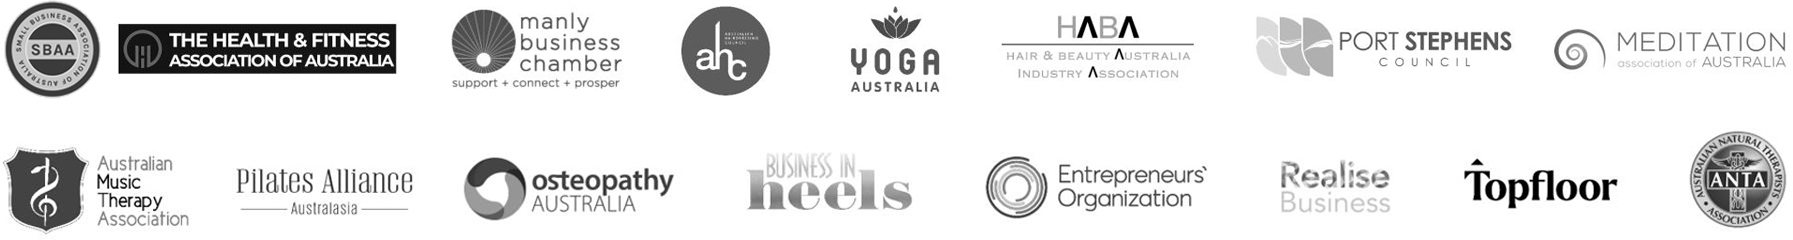 A group of different logos on a white background.